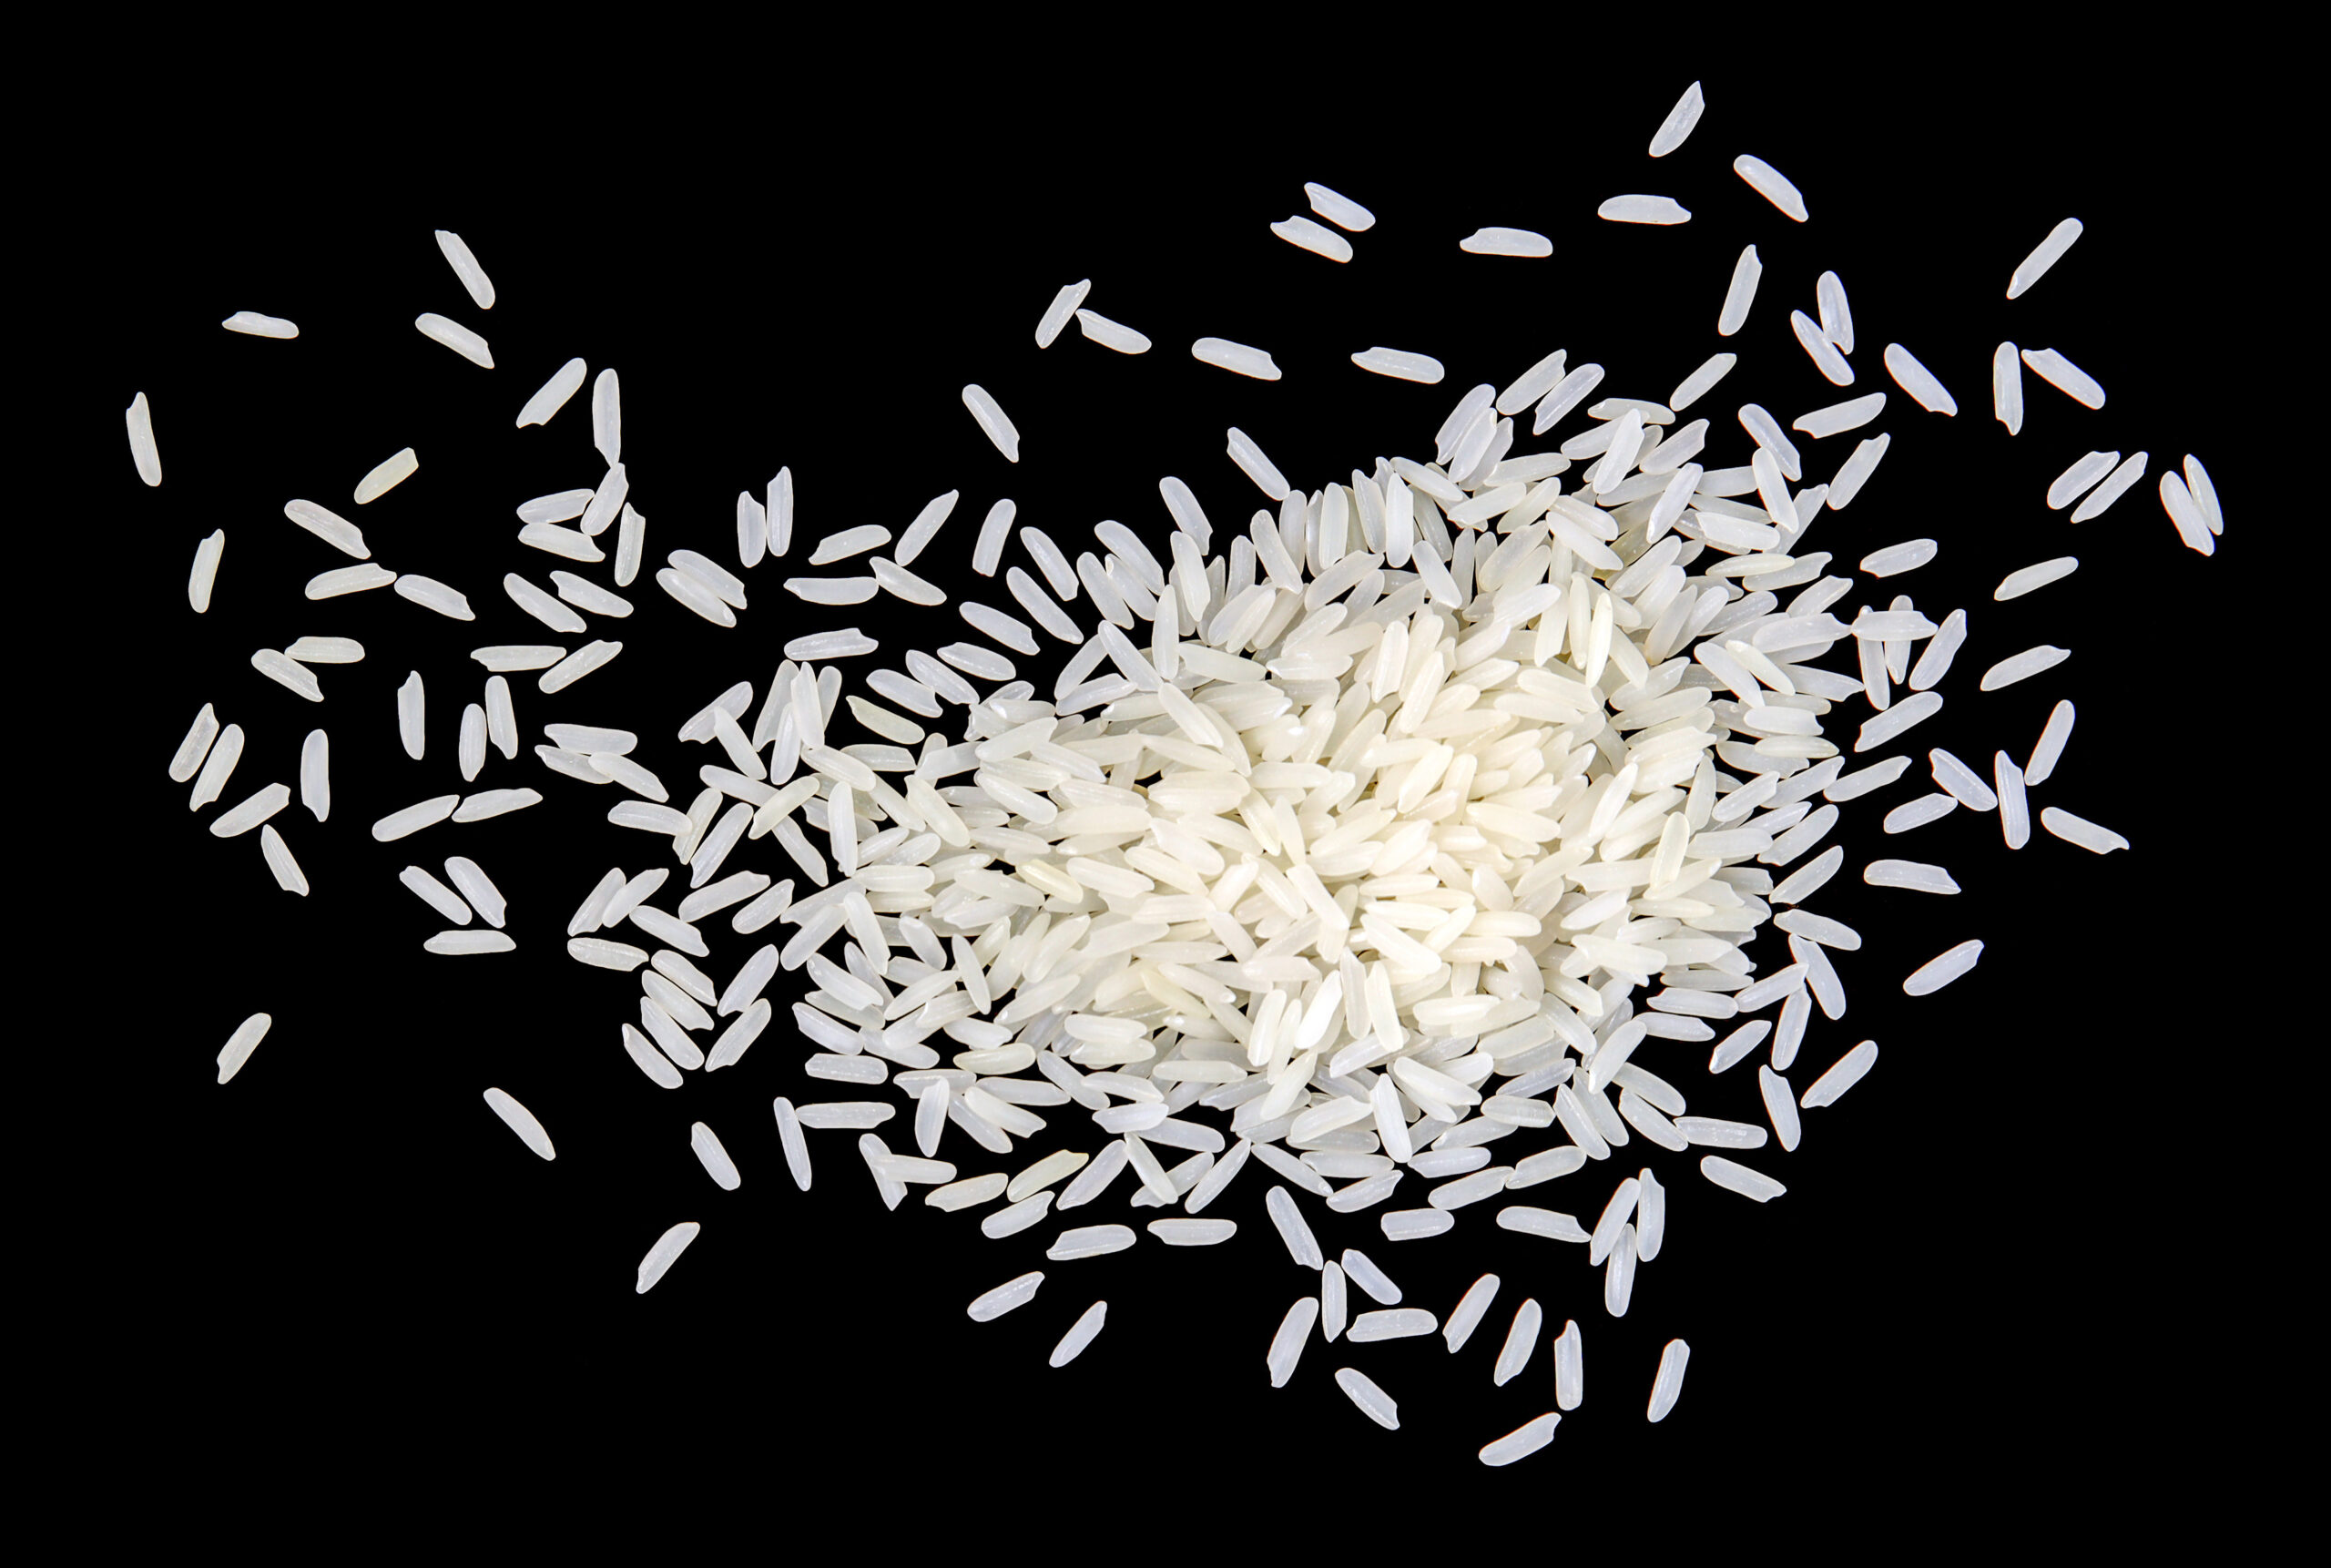 Top view, close-up. A pile of white uncooked rice grains, lying flat. Isolated on black background.